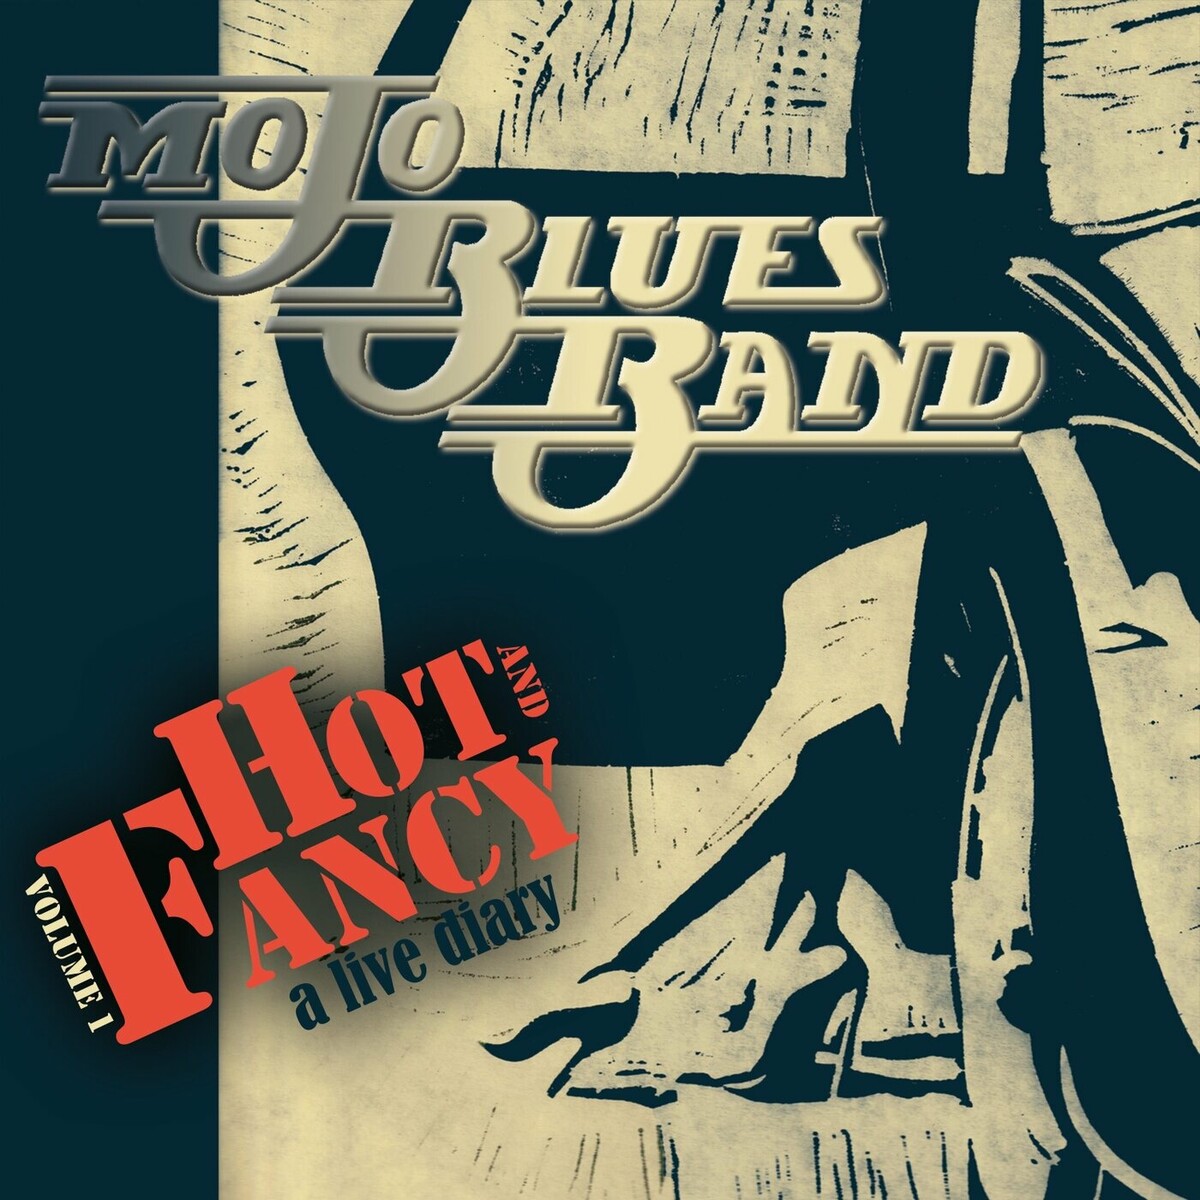 Mojo Blues Band - Hot and Fancy (Live)